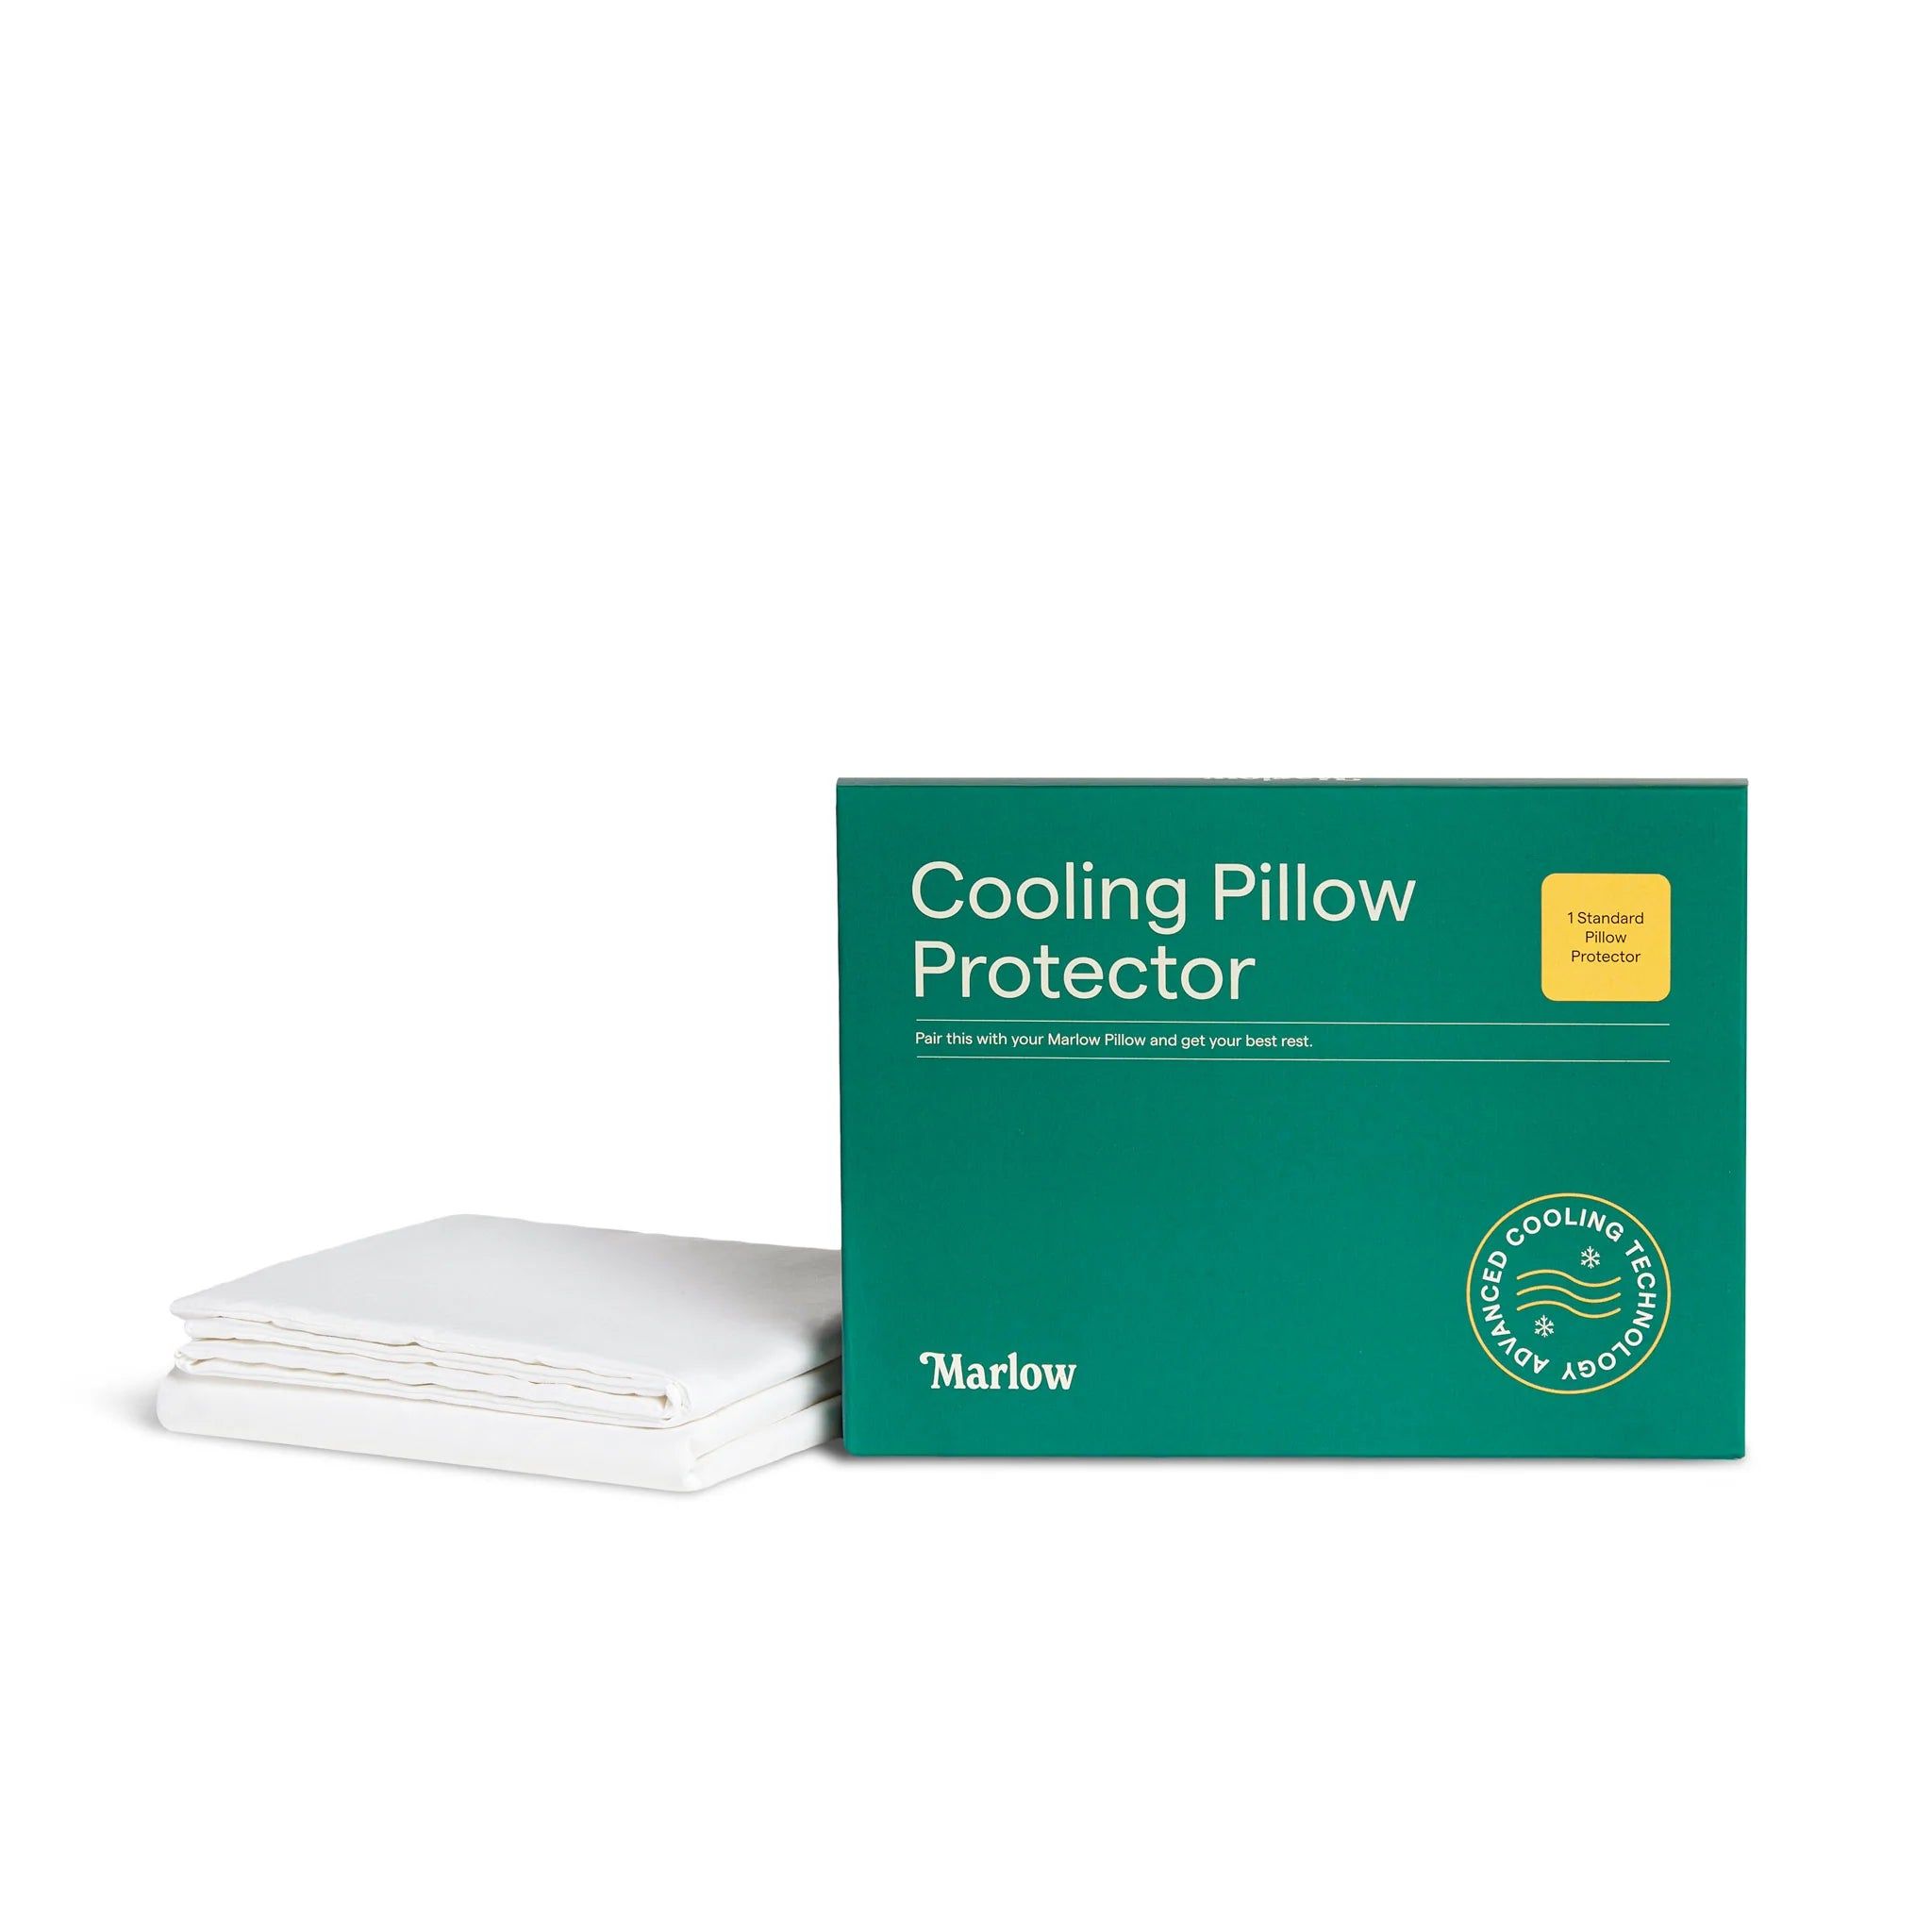 The Marlow Cooling Pillow Protector | Marlow Pillow